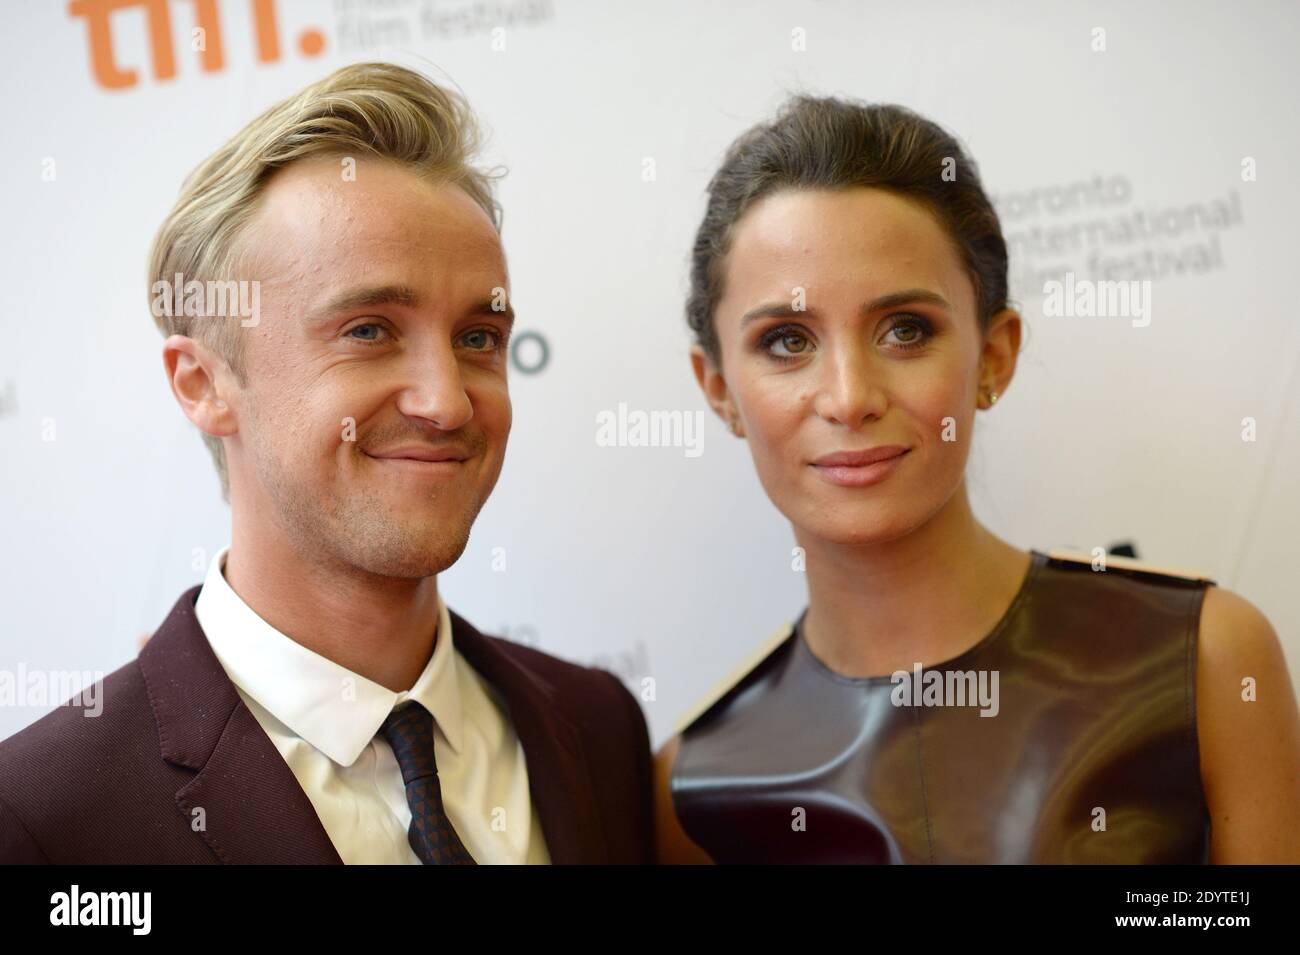 Page 4 - Tom Felton High Resolution Stock Photography and Images - Alamy